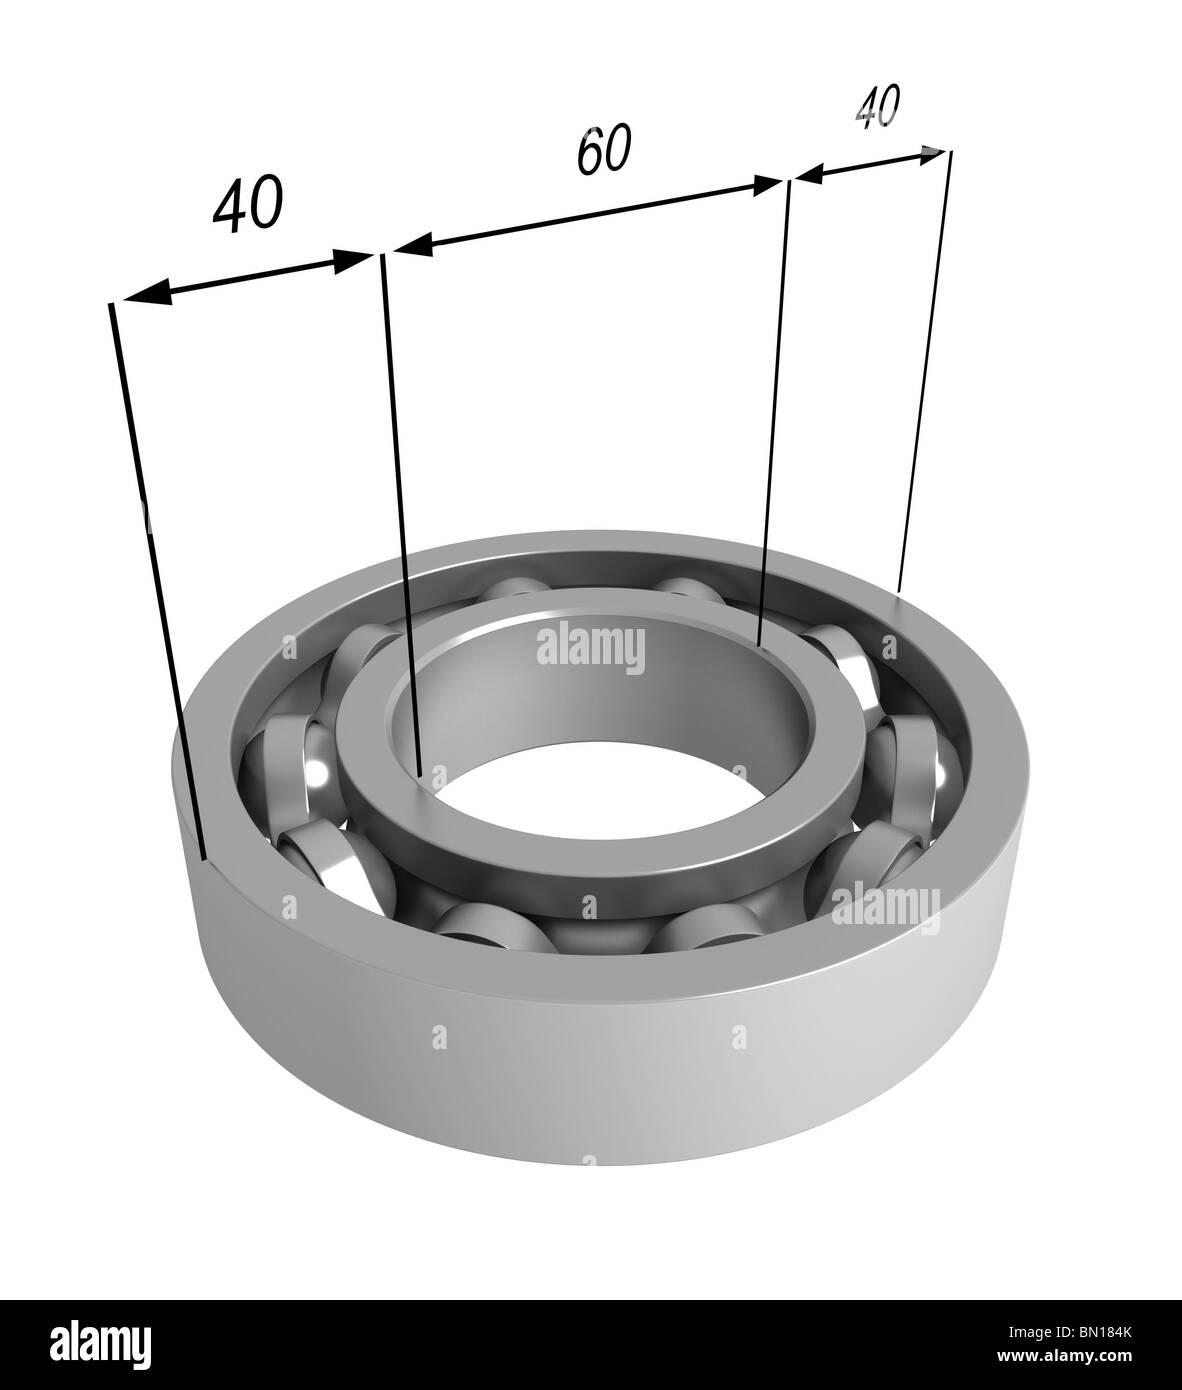 Three-dimensional model - the bearing with the marked sizes. Stock Photo